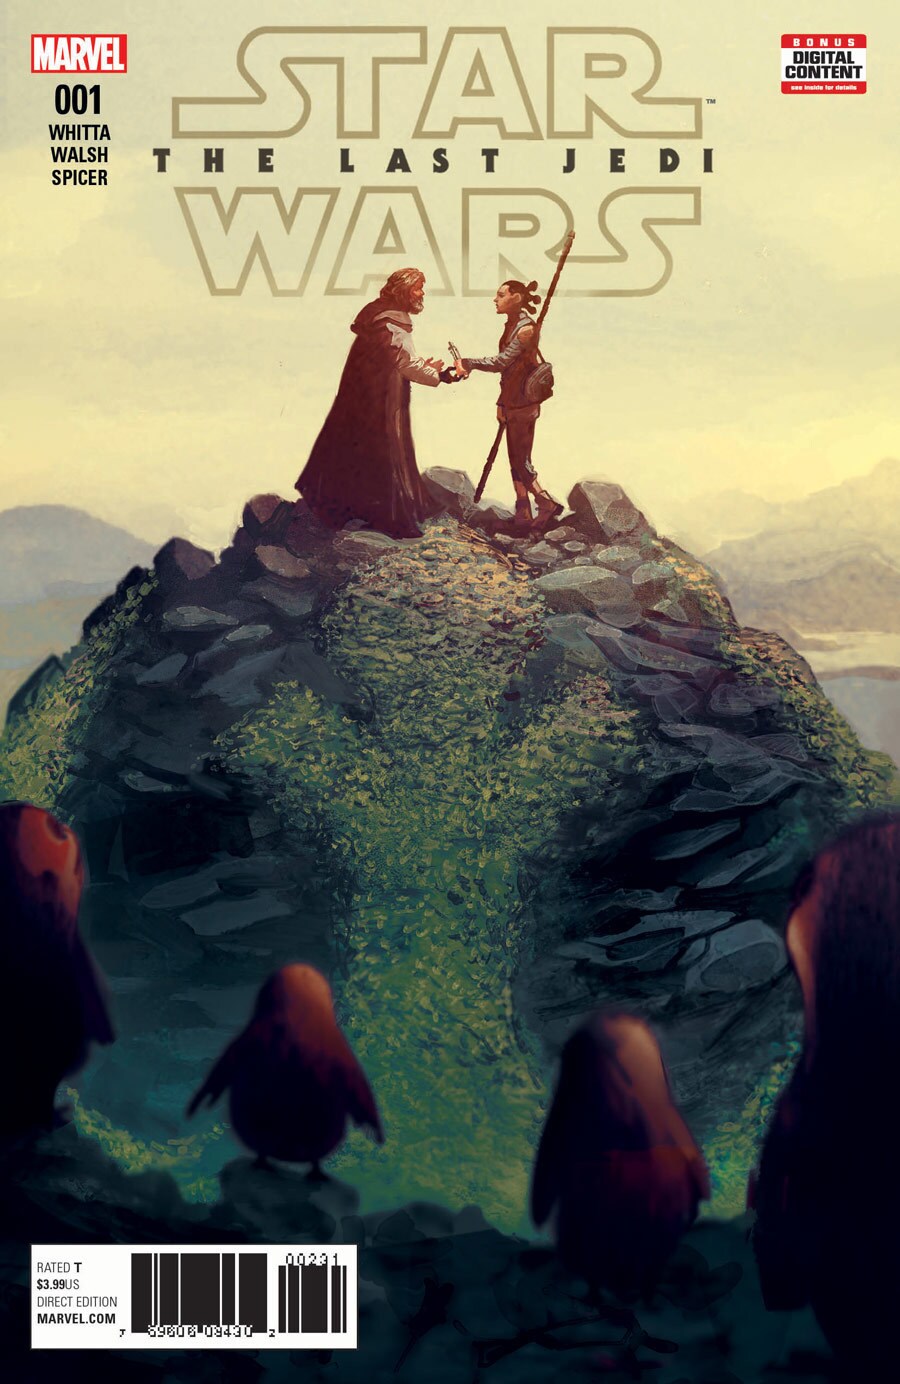 Luke Skywalker and Rey face each other on a rock on Ahch-To on the cover of the comic book adaptation of Star Wars: The Last Jedi by Gary Whitta.